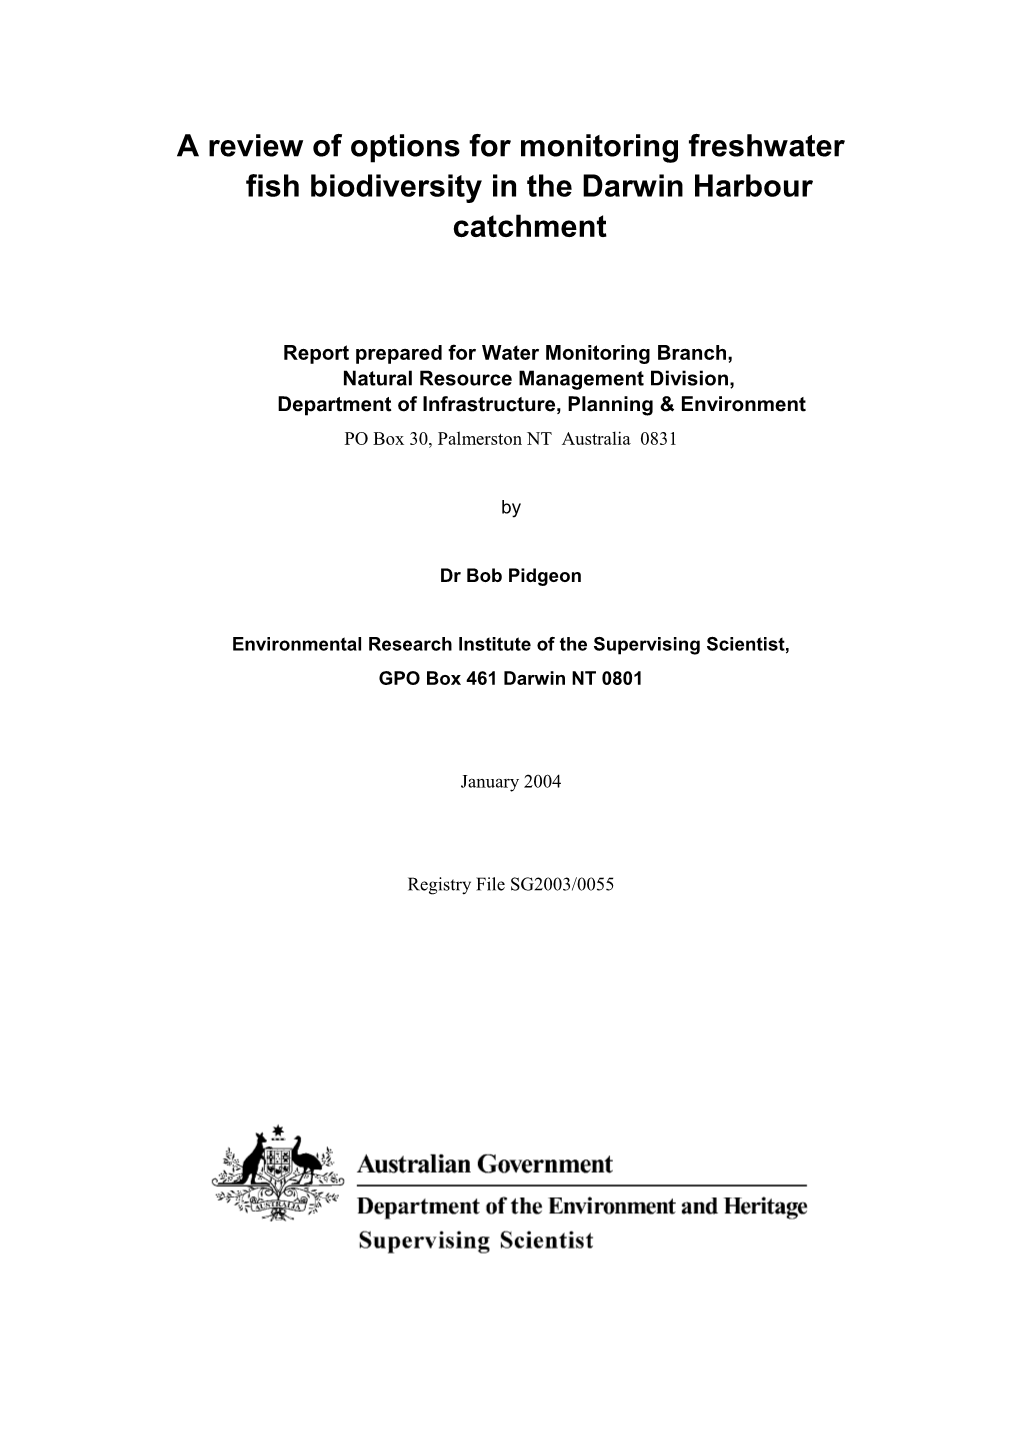 A Review of Options for Monitoring Freshwater Fish Biodiversity in the Darwin Harbour Catchment